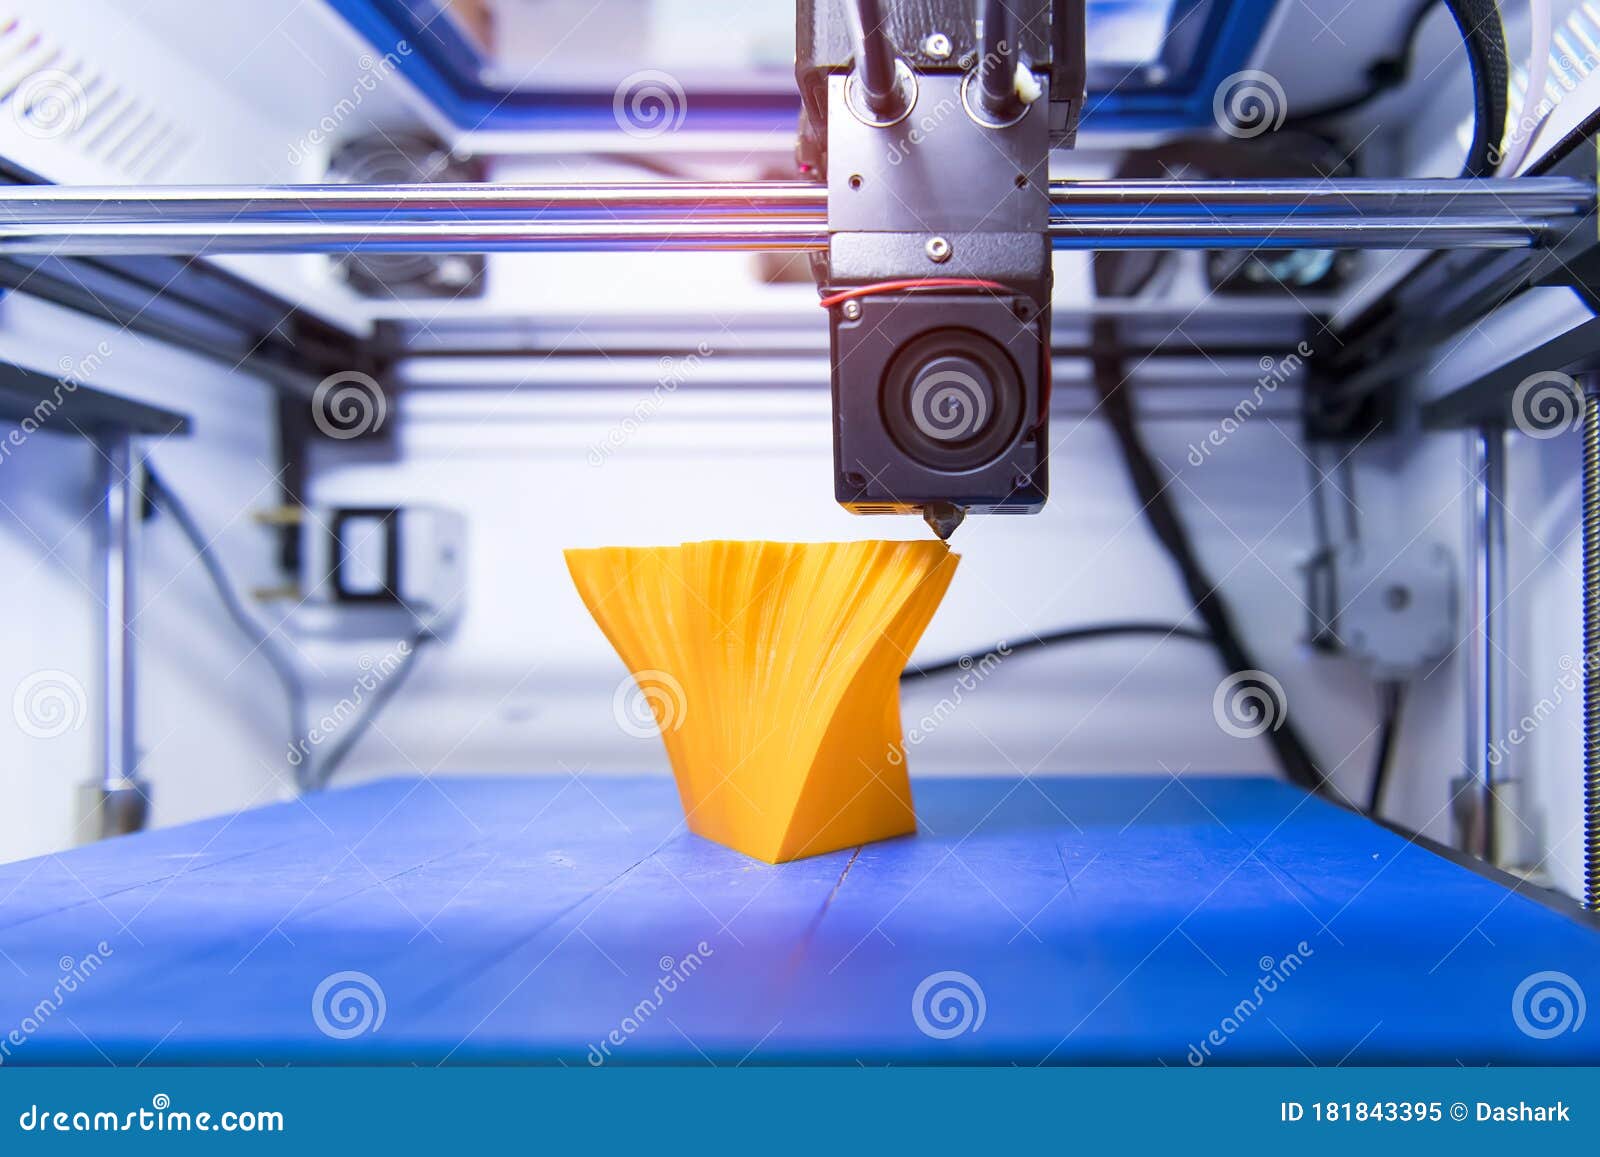 3d printer or additive manufacturing